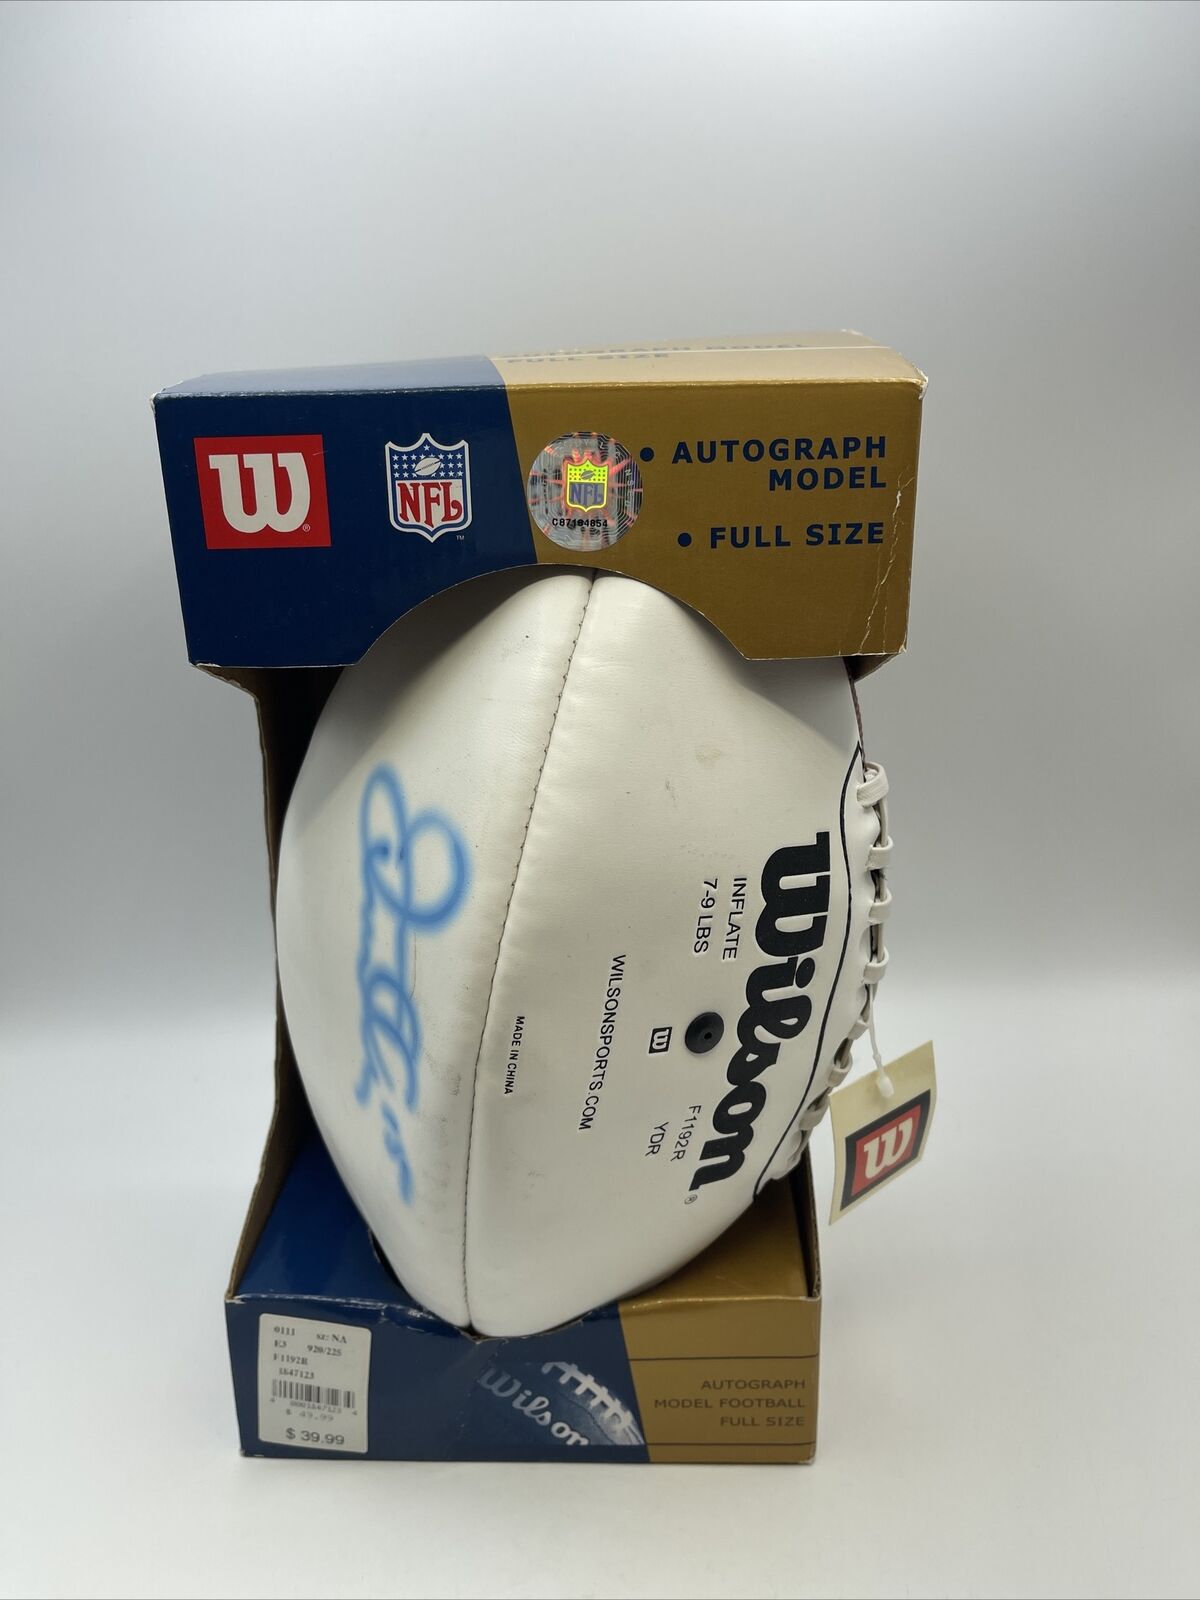 67% OFF of fixed price Wilson Autograph Model Football Full Size Panel 3 NFL NIB White Max 43% OFF